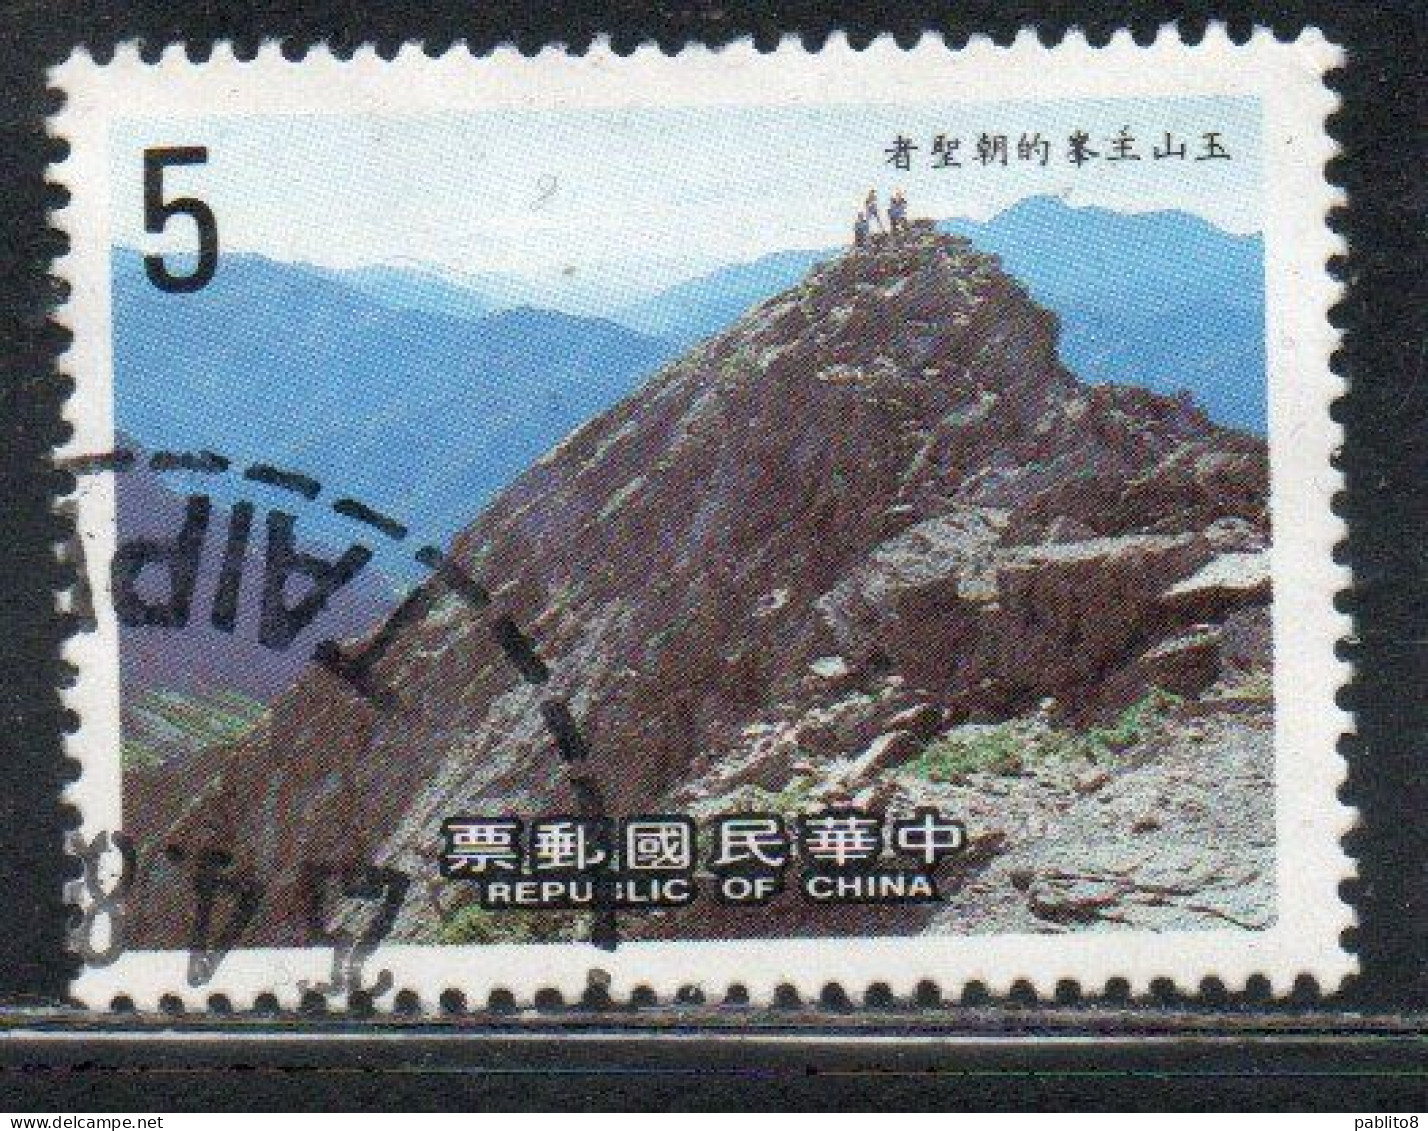 CHINA REPUBLIC CINA TAIWAN FORMOSA 1986 KENTING FIRST NATIONAL PARK SHORE ROCKS 5$ USED USATO OBLITERE' - Used Stamps